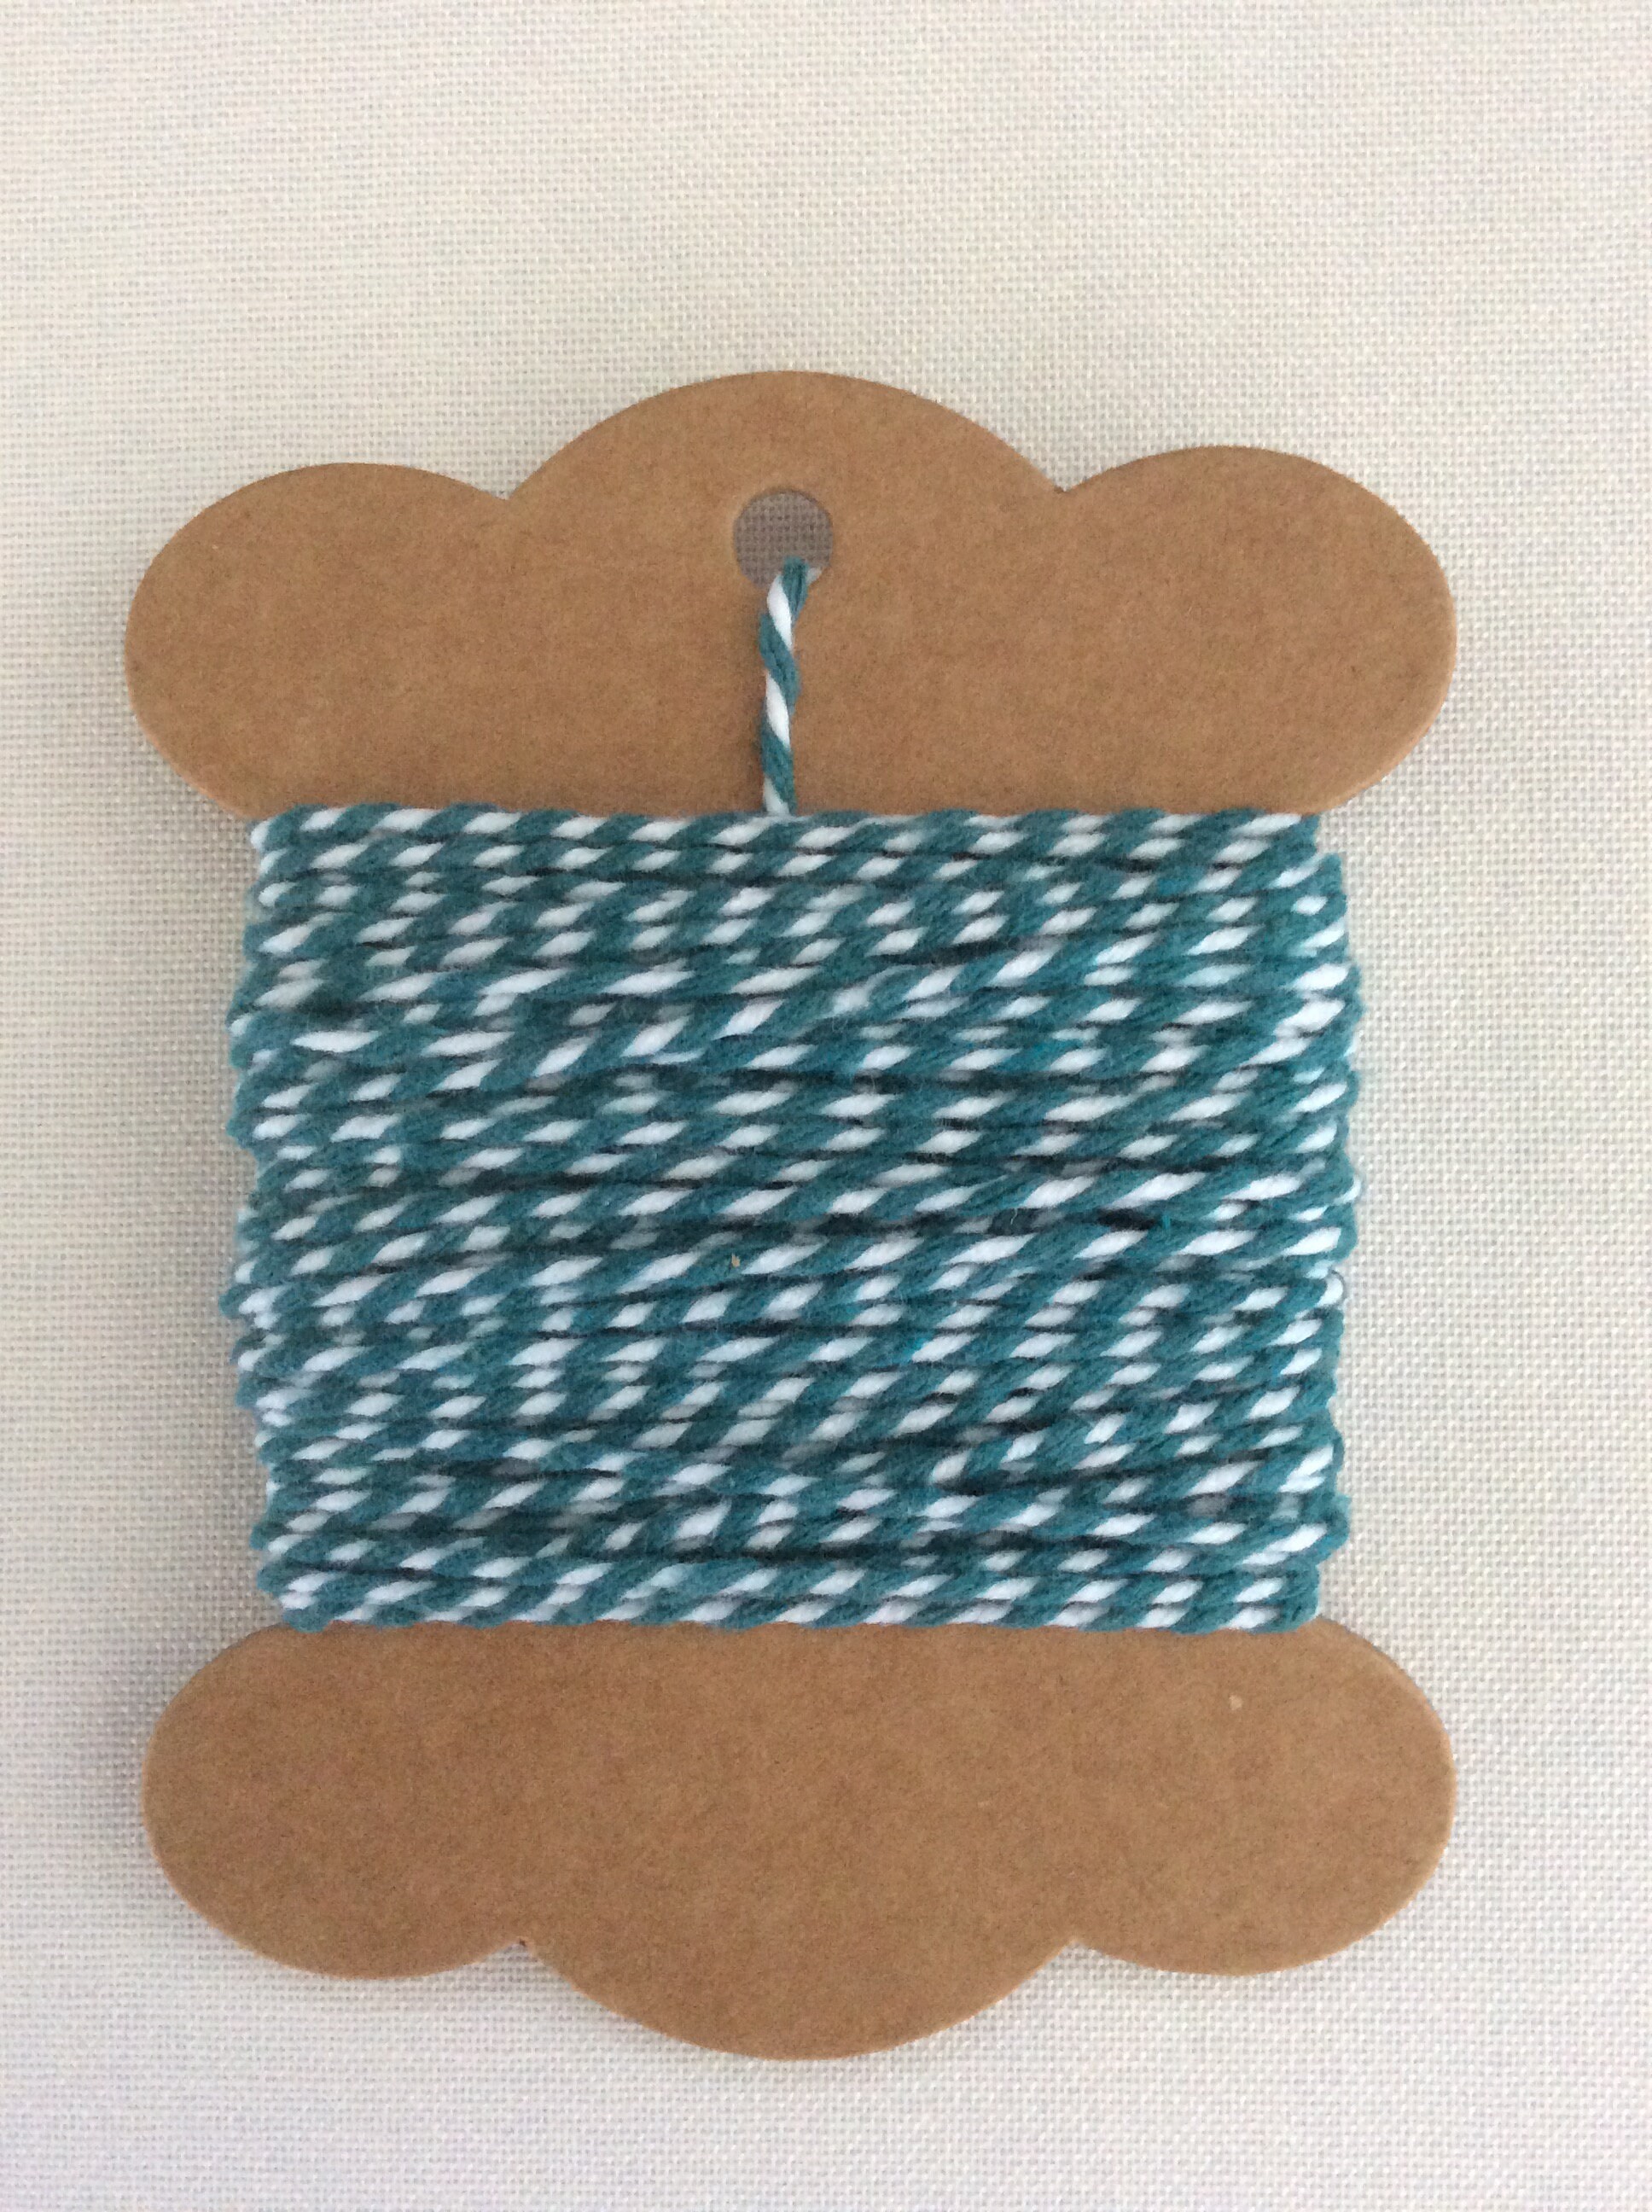 Teal Green Bakery Twine (1 Roll) Teal Green Twine, Teal Green Deli Twine,  Teal Green Gift Wrapping Twine, Teal Green Crafters Twine, Twine